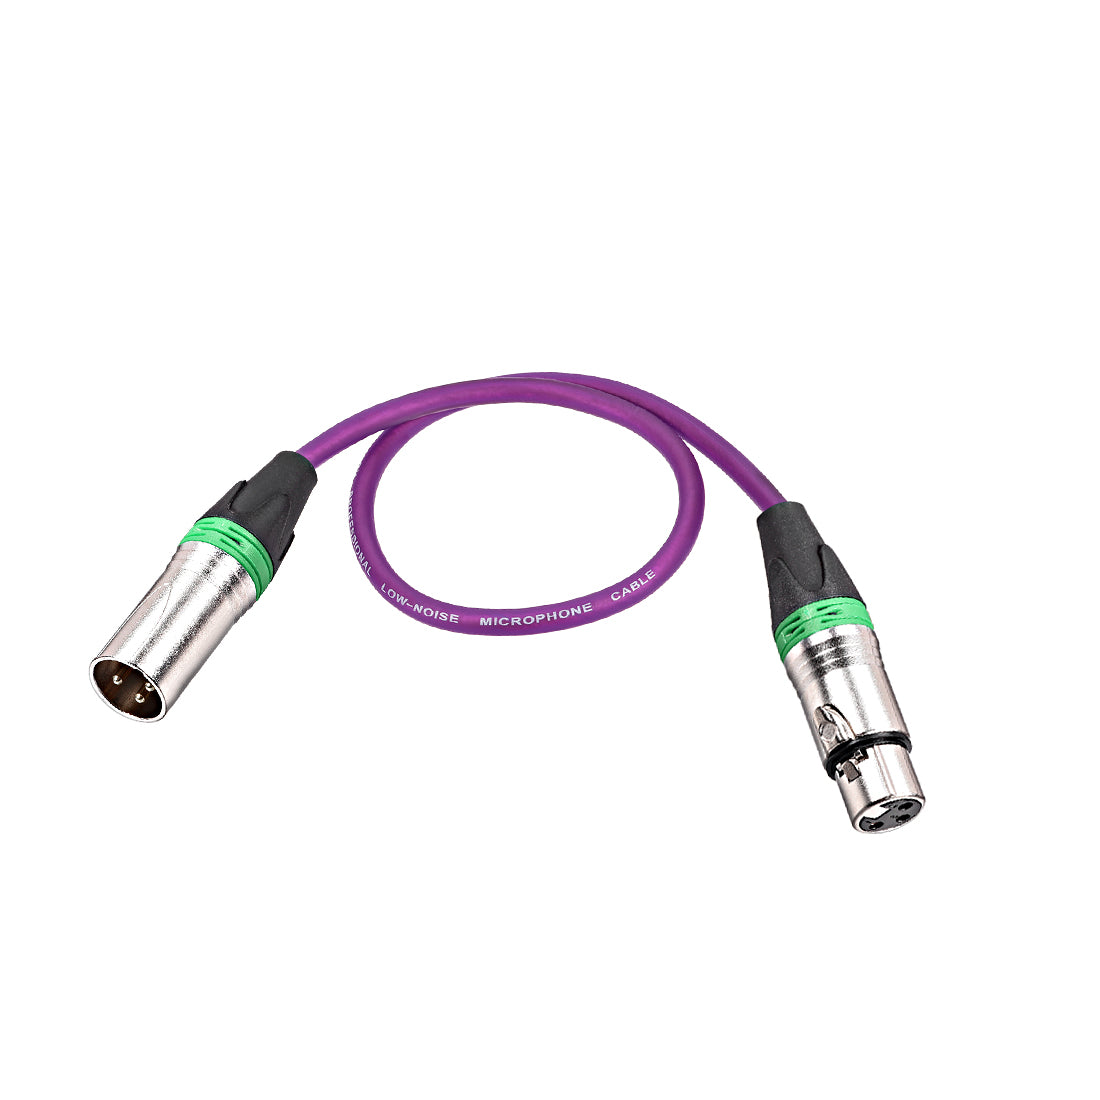 uxcell Uxcell XLR Male to XLR Female Cable Line for Microphone Video Camera Sound Card Mixer Green Silver Tone XLR Purple Line 0.5M 1.64ft